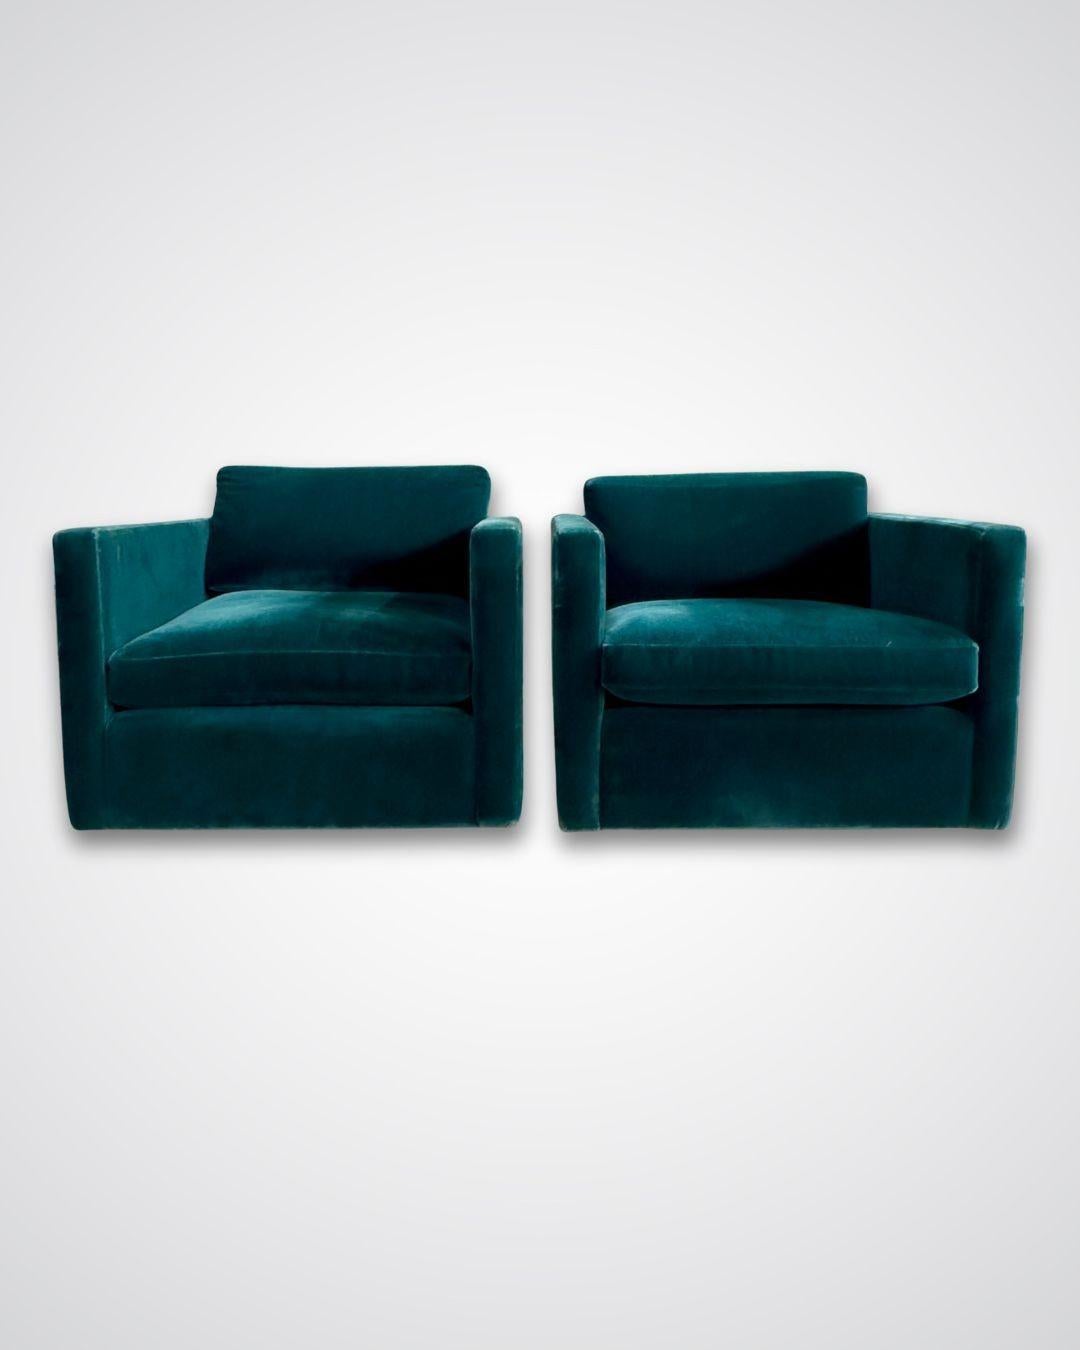 Pair Knoll Charles Pfister Mohair Lounge Chairs, 1980.  Original beautiful emerald color mohairs.  There is some signs of wear consistent with age and use.